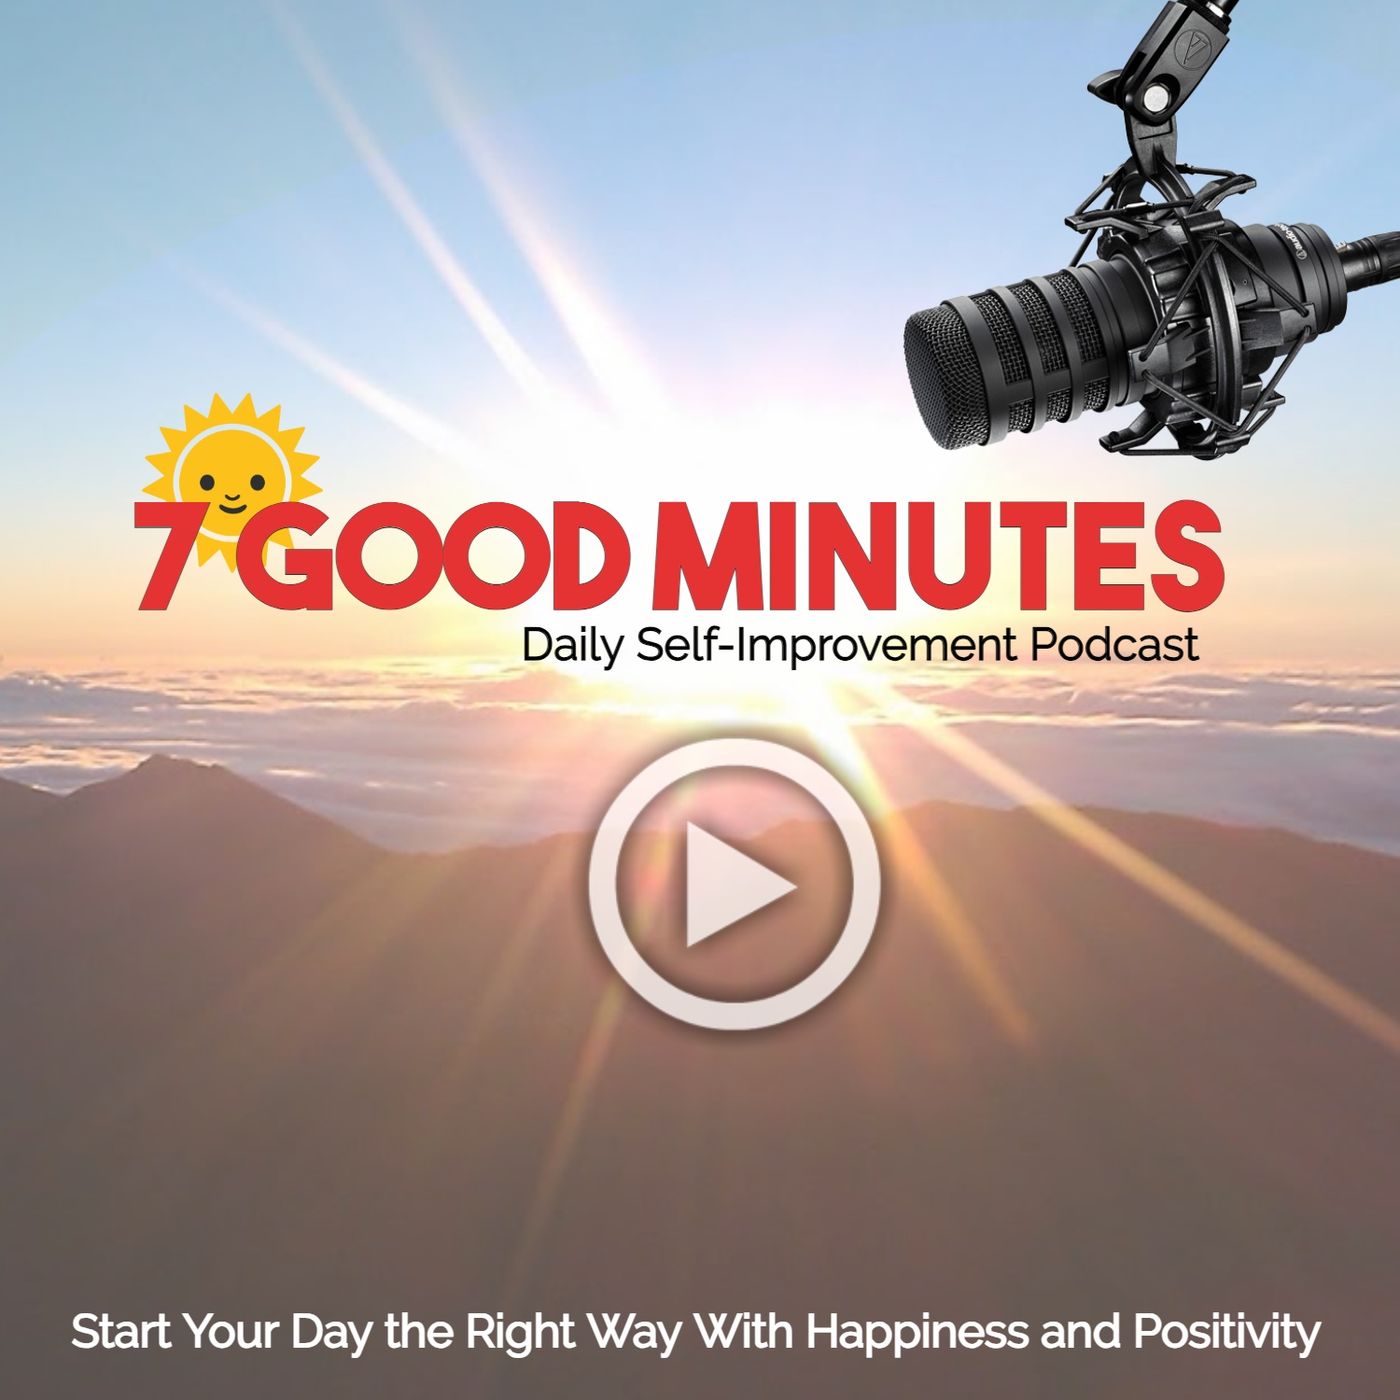 7 Good Minutes: Extra - Giving is an expression of...